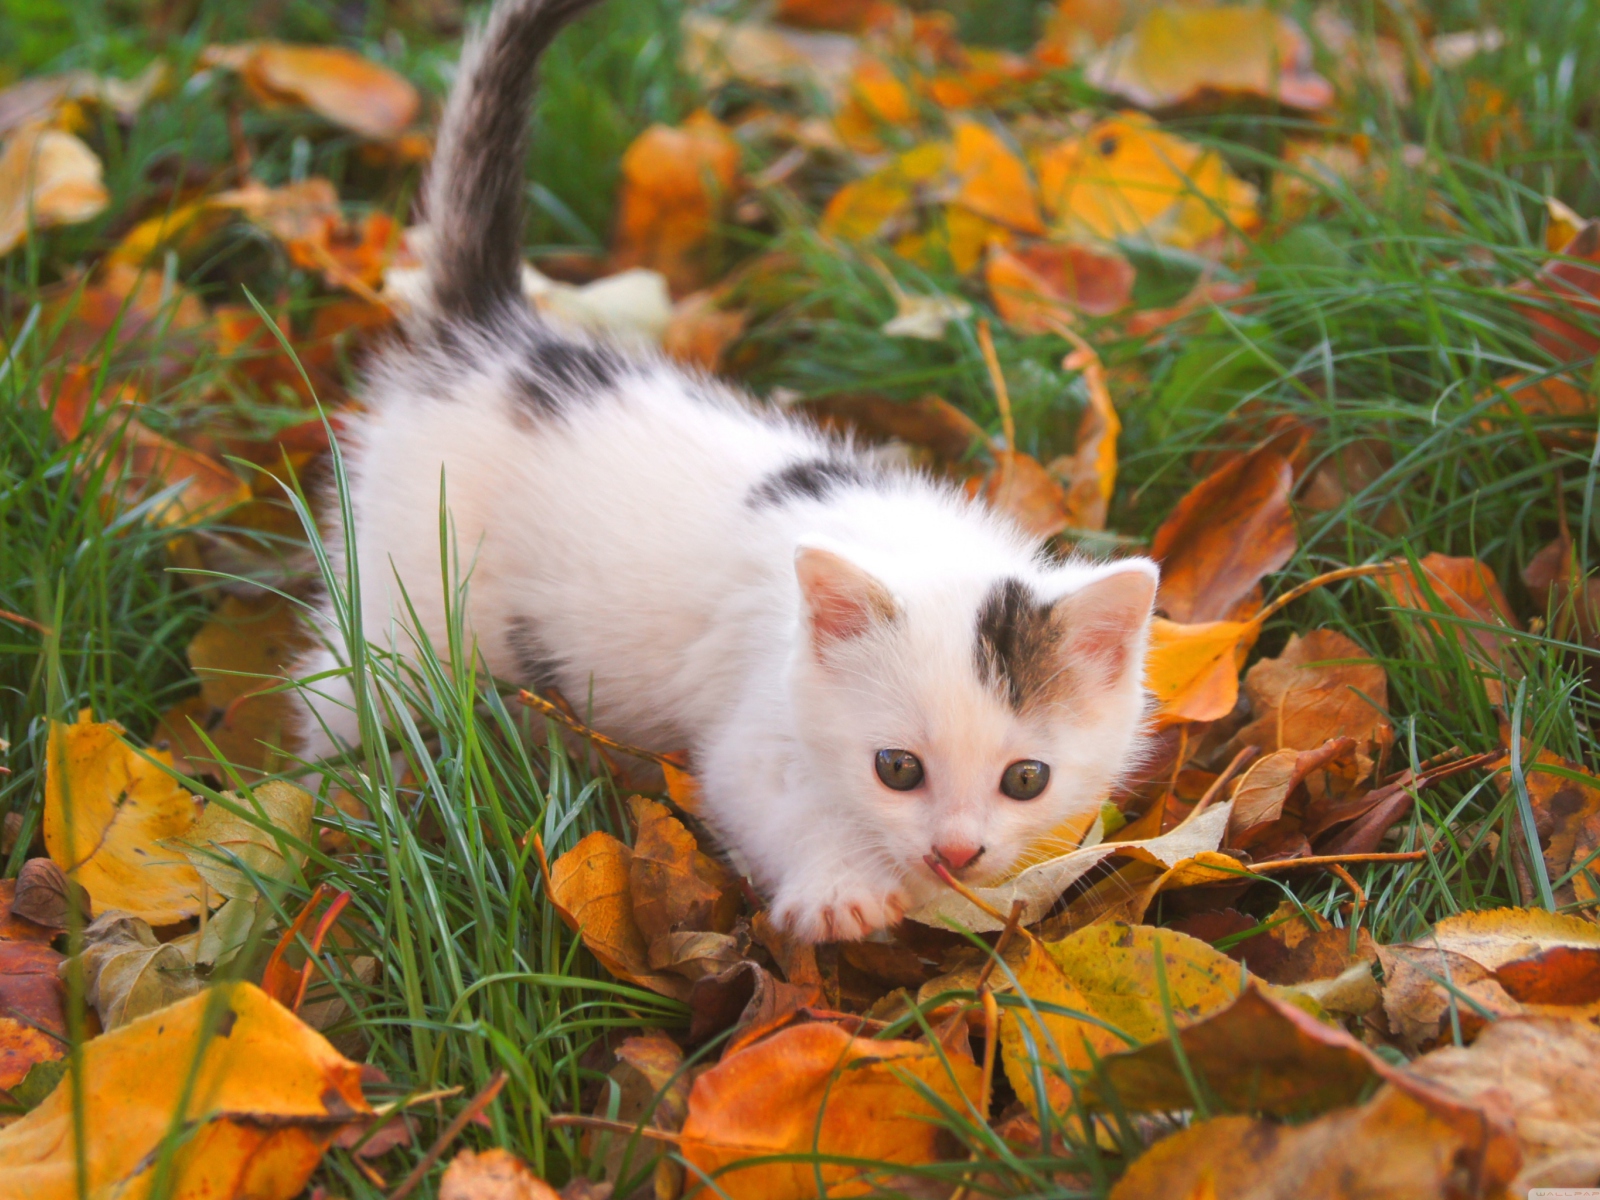 Das Kitty And Autumn Leaves Wallpaper 1600x1200